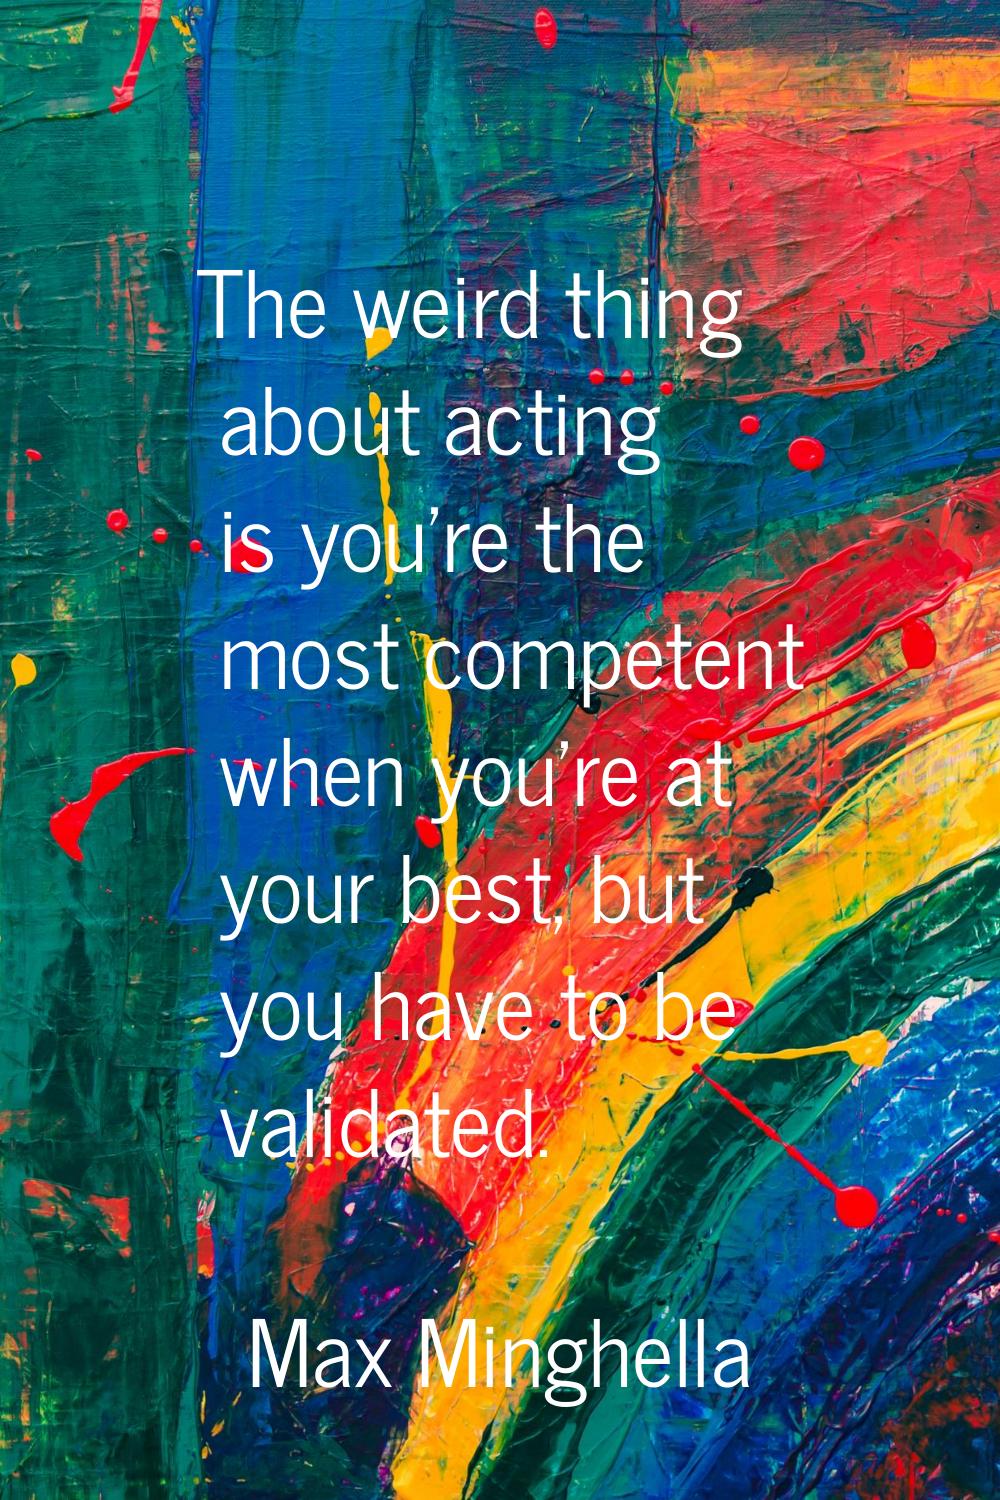 The weird thing about acting is you're the most competent when you're at your best, but you have to